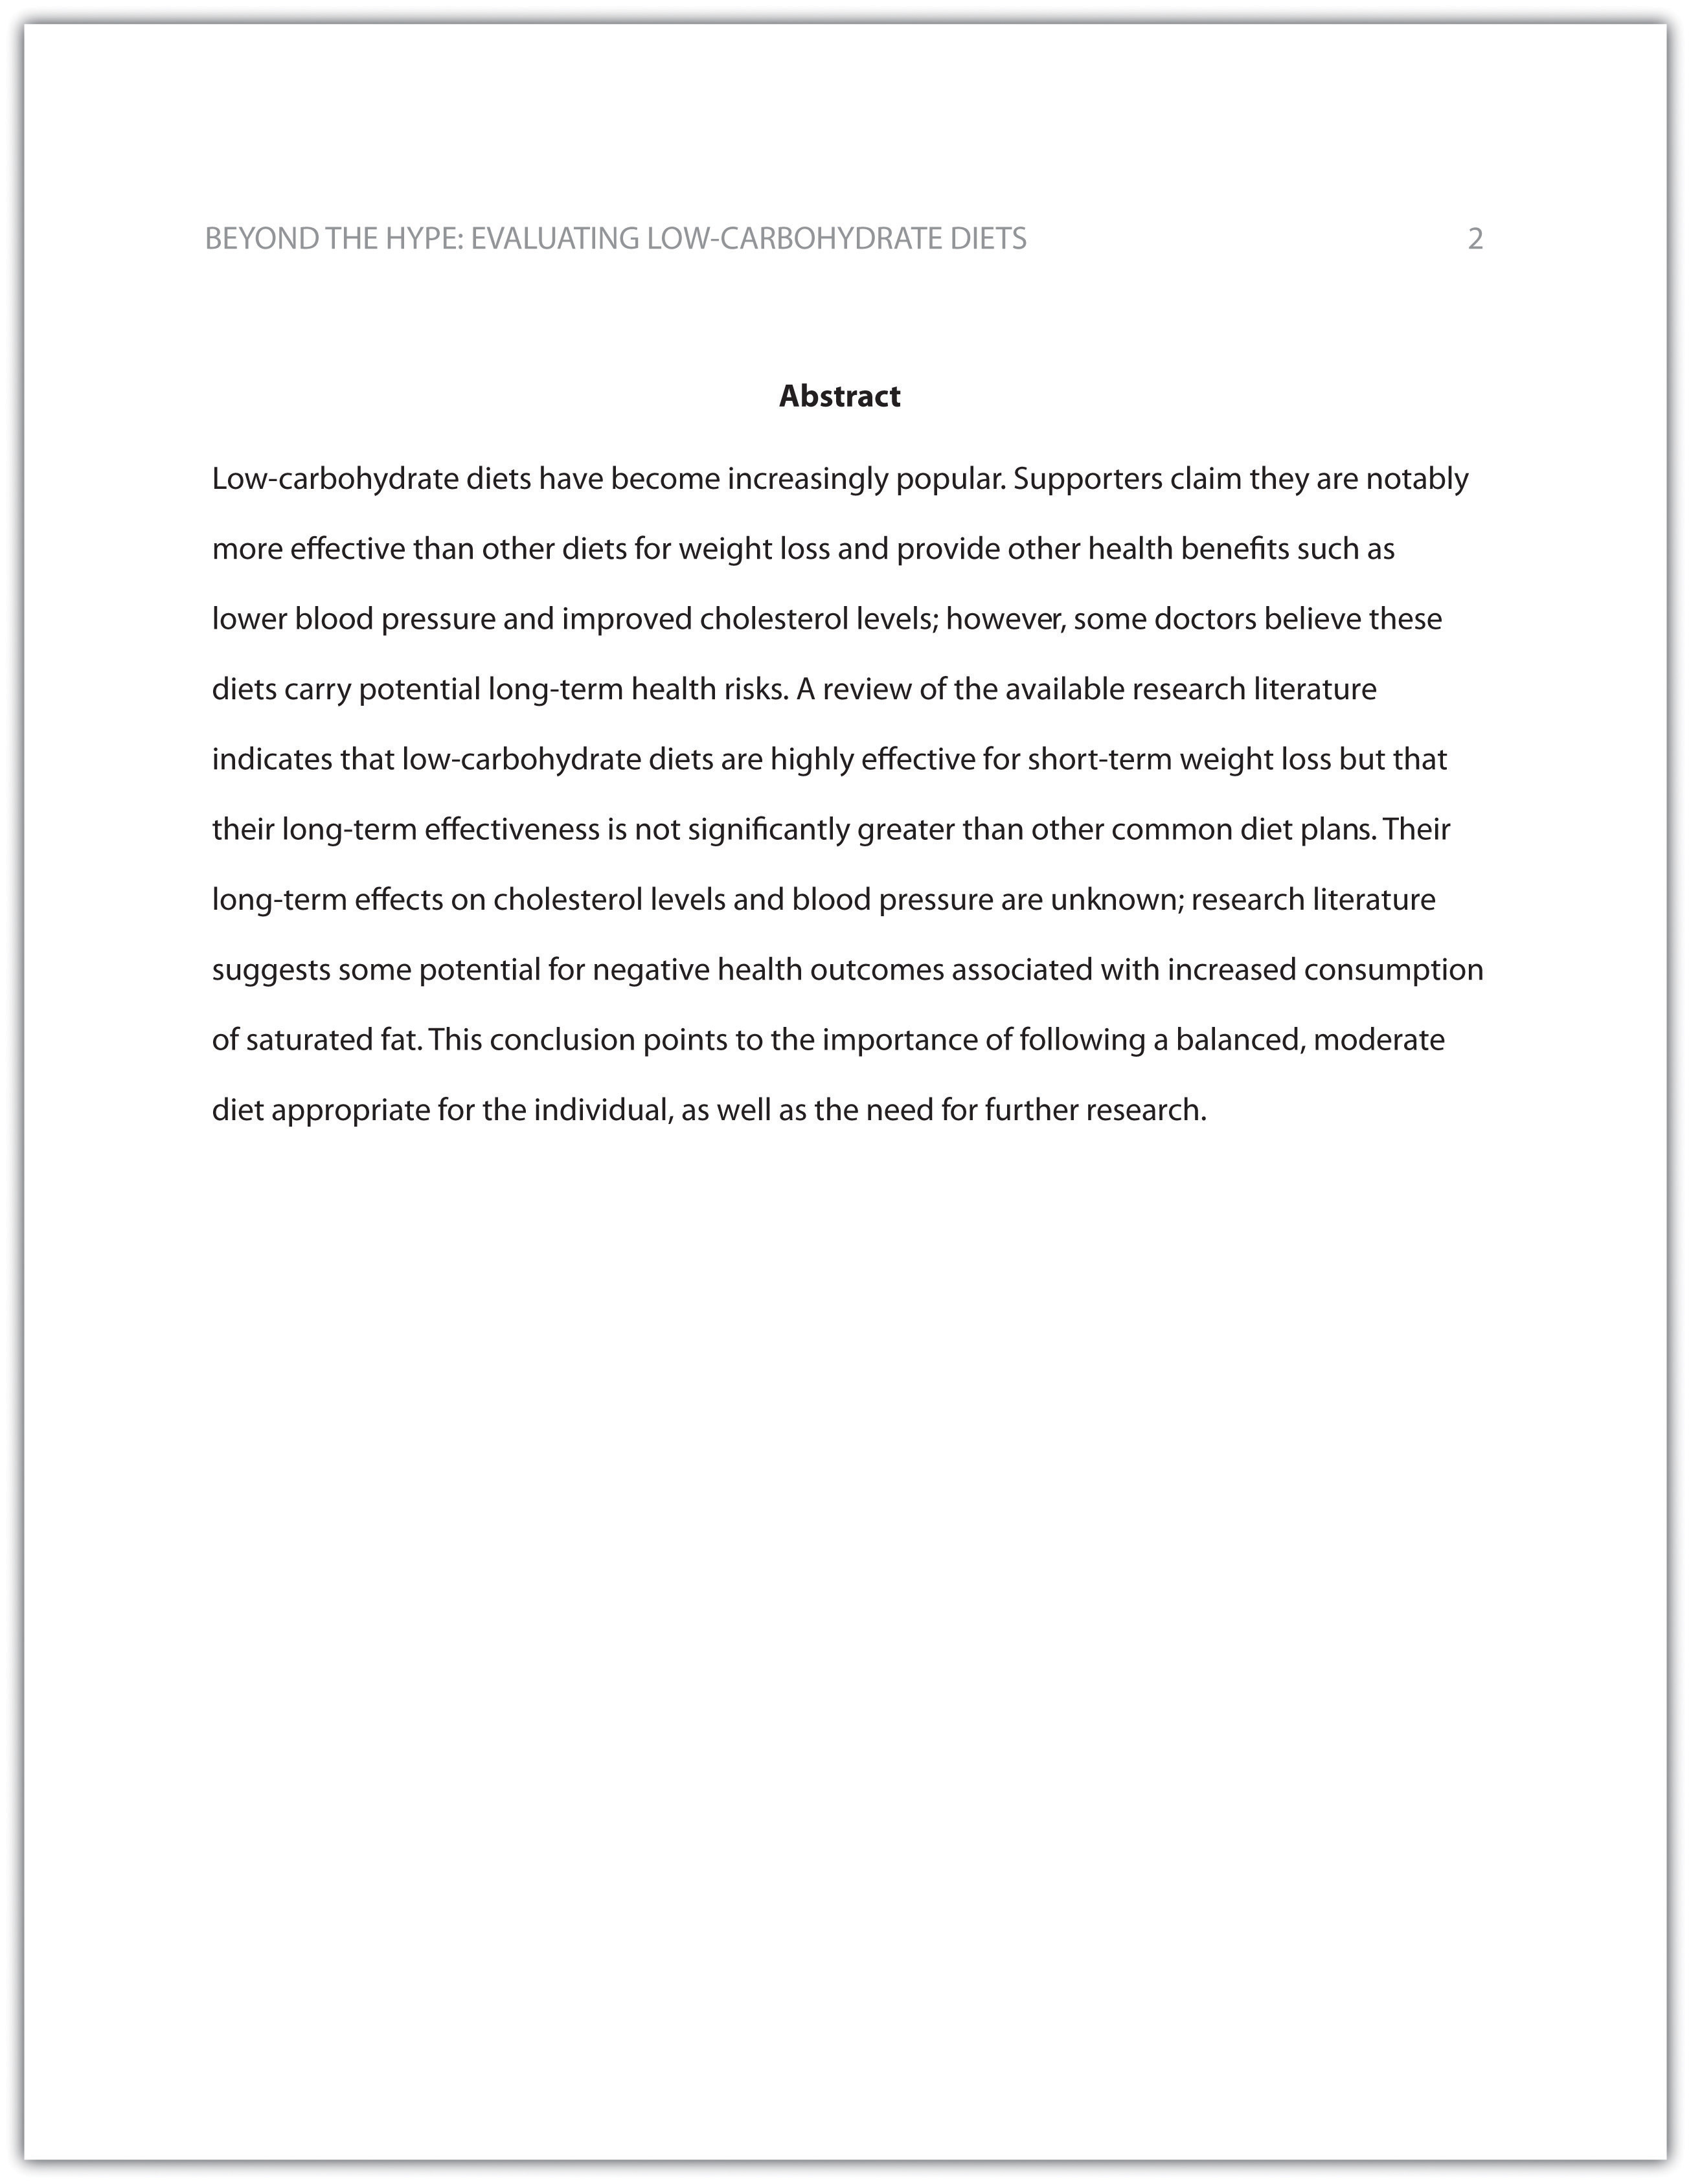 how to write a scientific article abstract